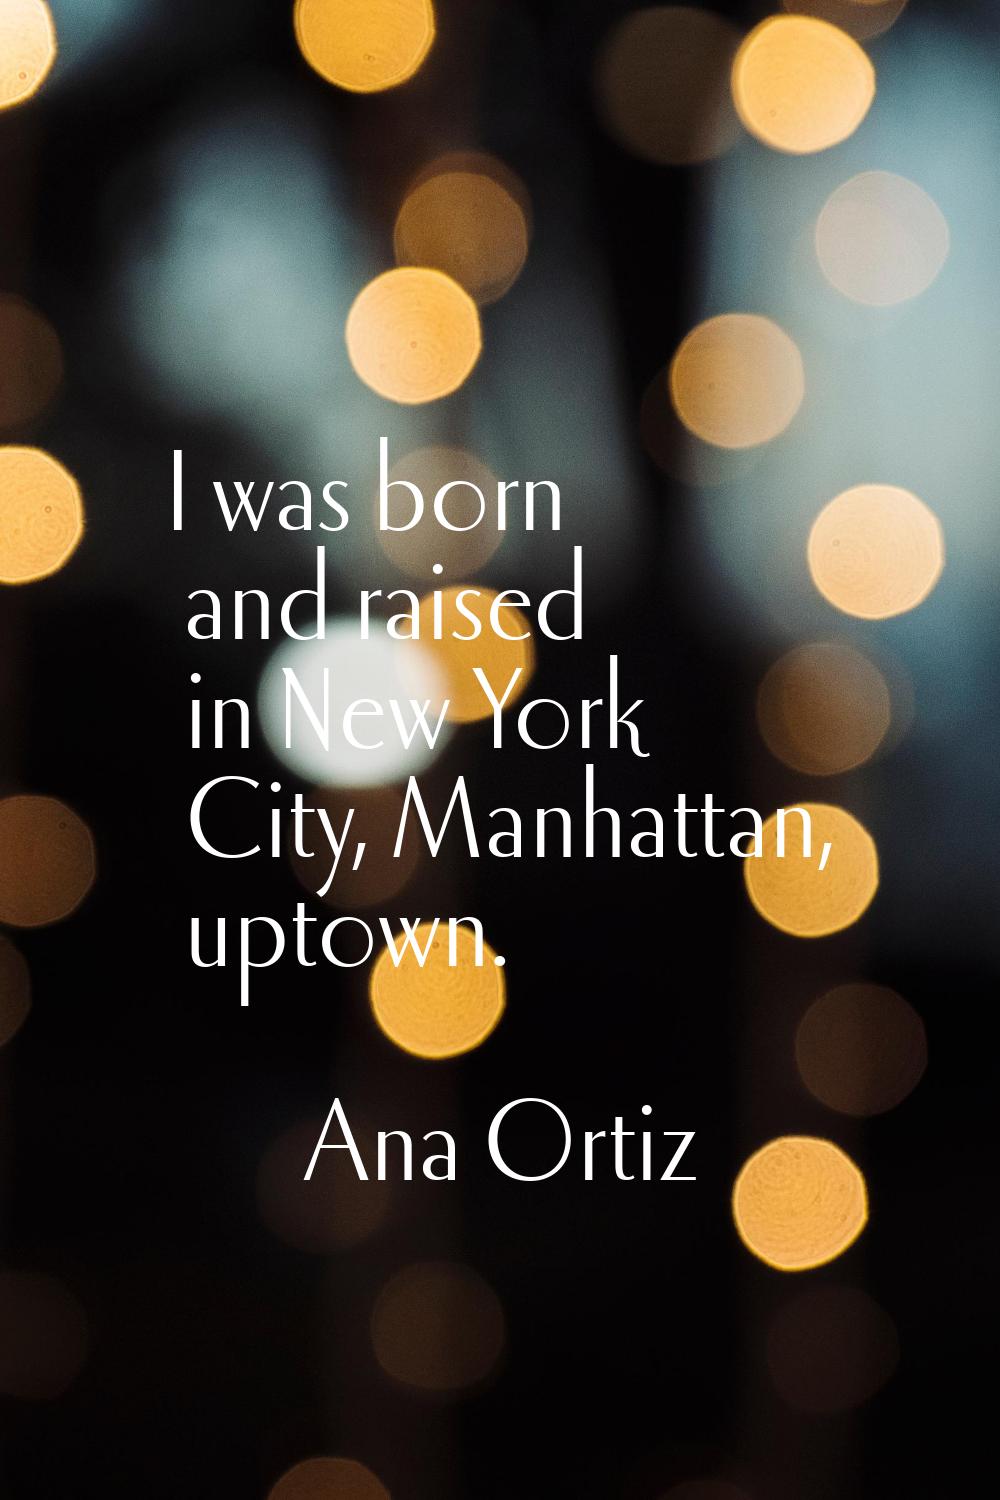 I was born and raised in New York City, Manhattan, uptown.